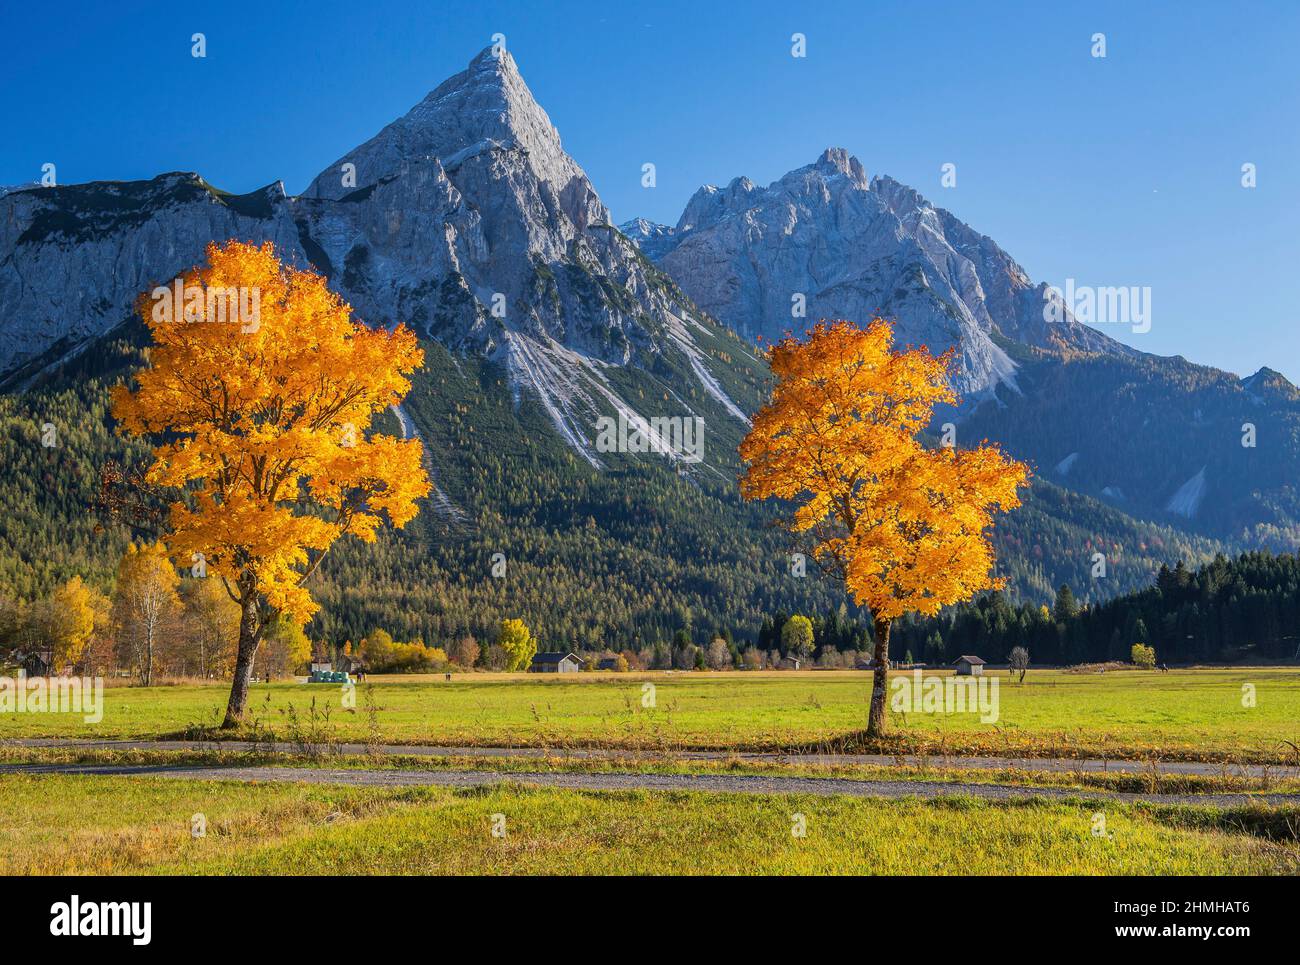 Autumn landscape in the Lermooser Moos with maple trees against the Sonnenspitze 2417m in the Mieminger chain, Ehrwald, Loisachtal, Tyrol, Austria Stock Photo